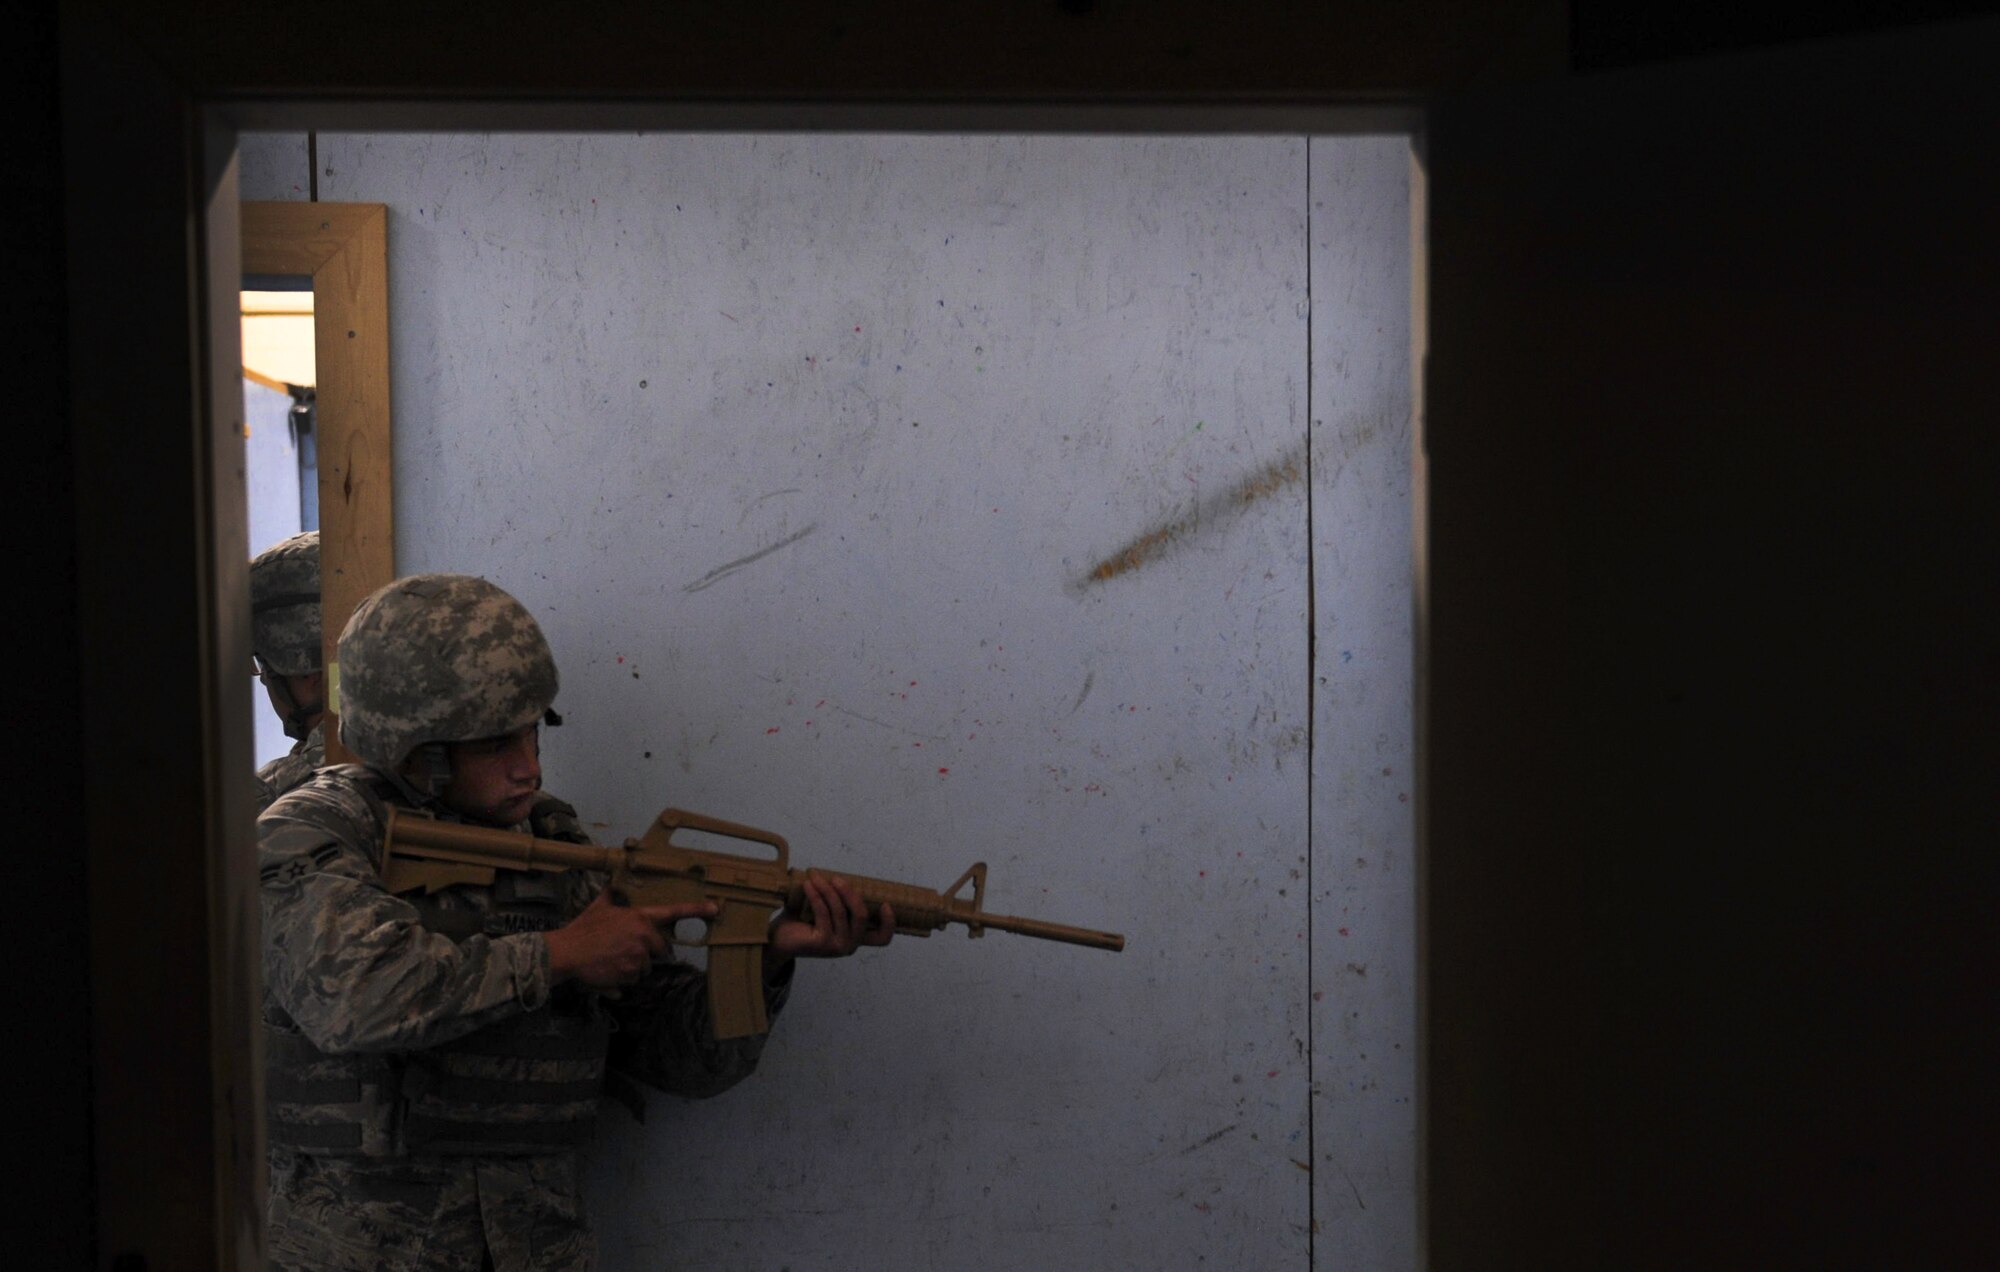 Airman 1st Class Benedetto Mancini, 99th Security Forces Squadron member, covers the rear of a rescue team in a hallway during a training scenario in Area II on Nellis Air Force Base, Nev., May 17, 2017. The exercise was designed to prepare and test the response efforts of SFS Airmen in the event of a dangerous situation. (U.S. Air Force photo by Senior Airman Kevin Tanenbaum/Released)